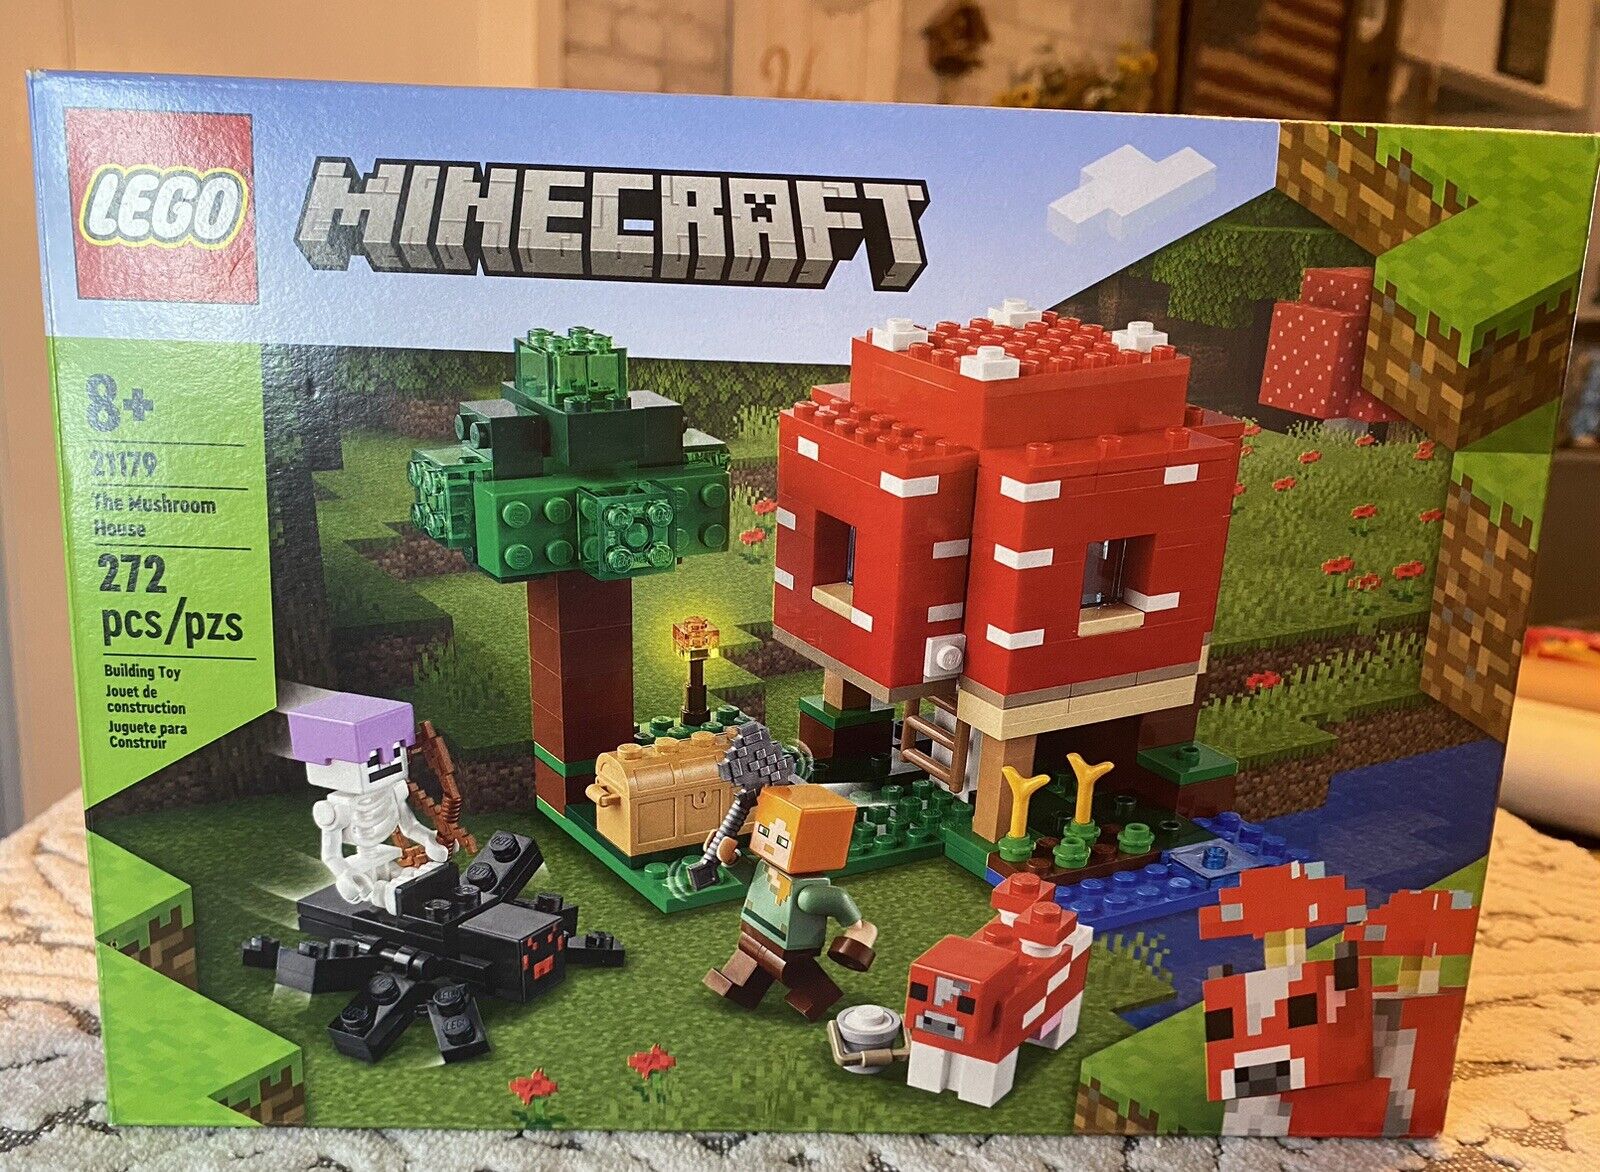 LEGO Minecraft: The Mushroom House (21179) - Box Opened But Bags Still Sealed